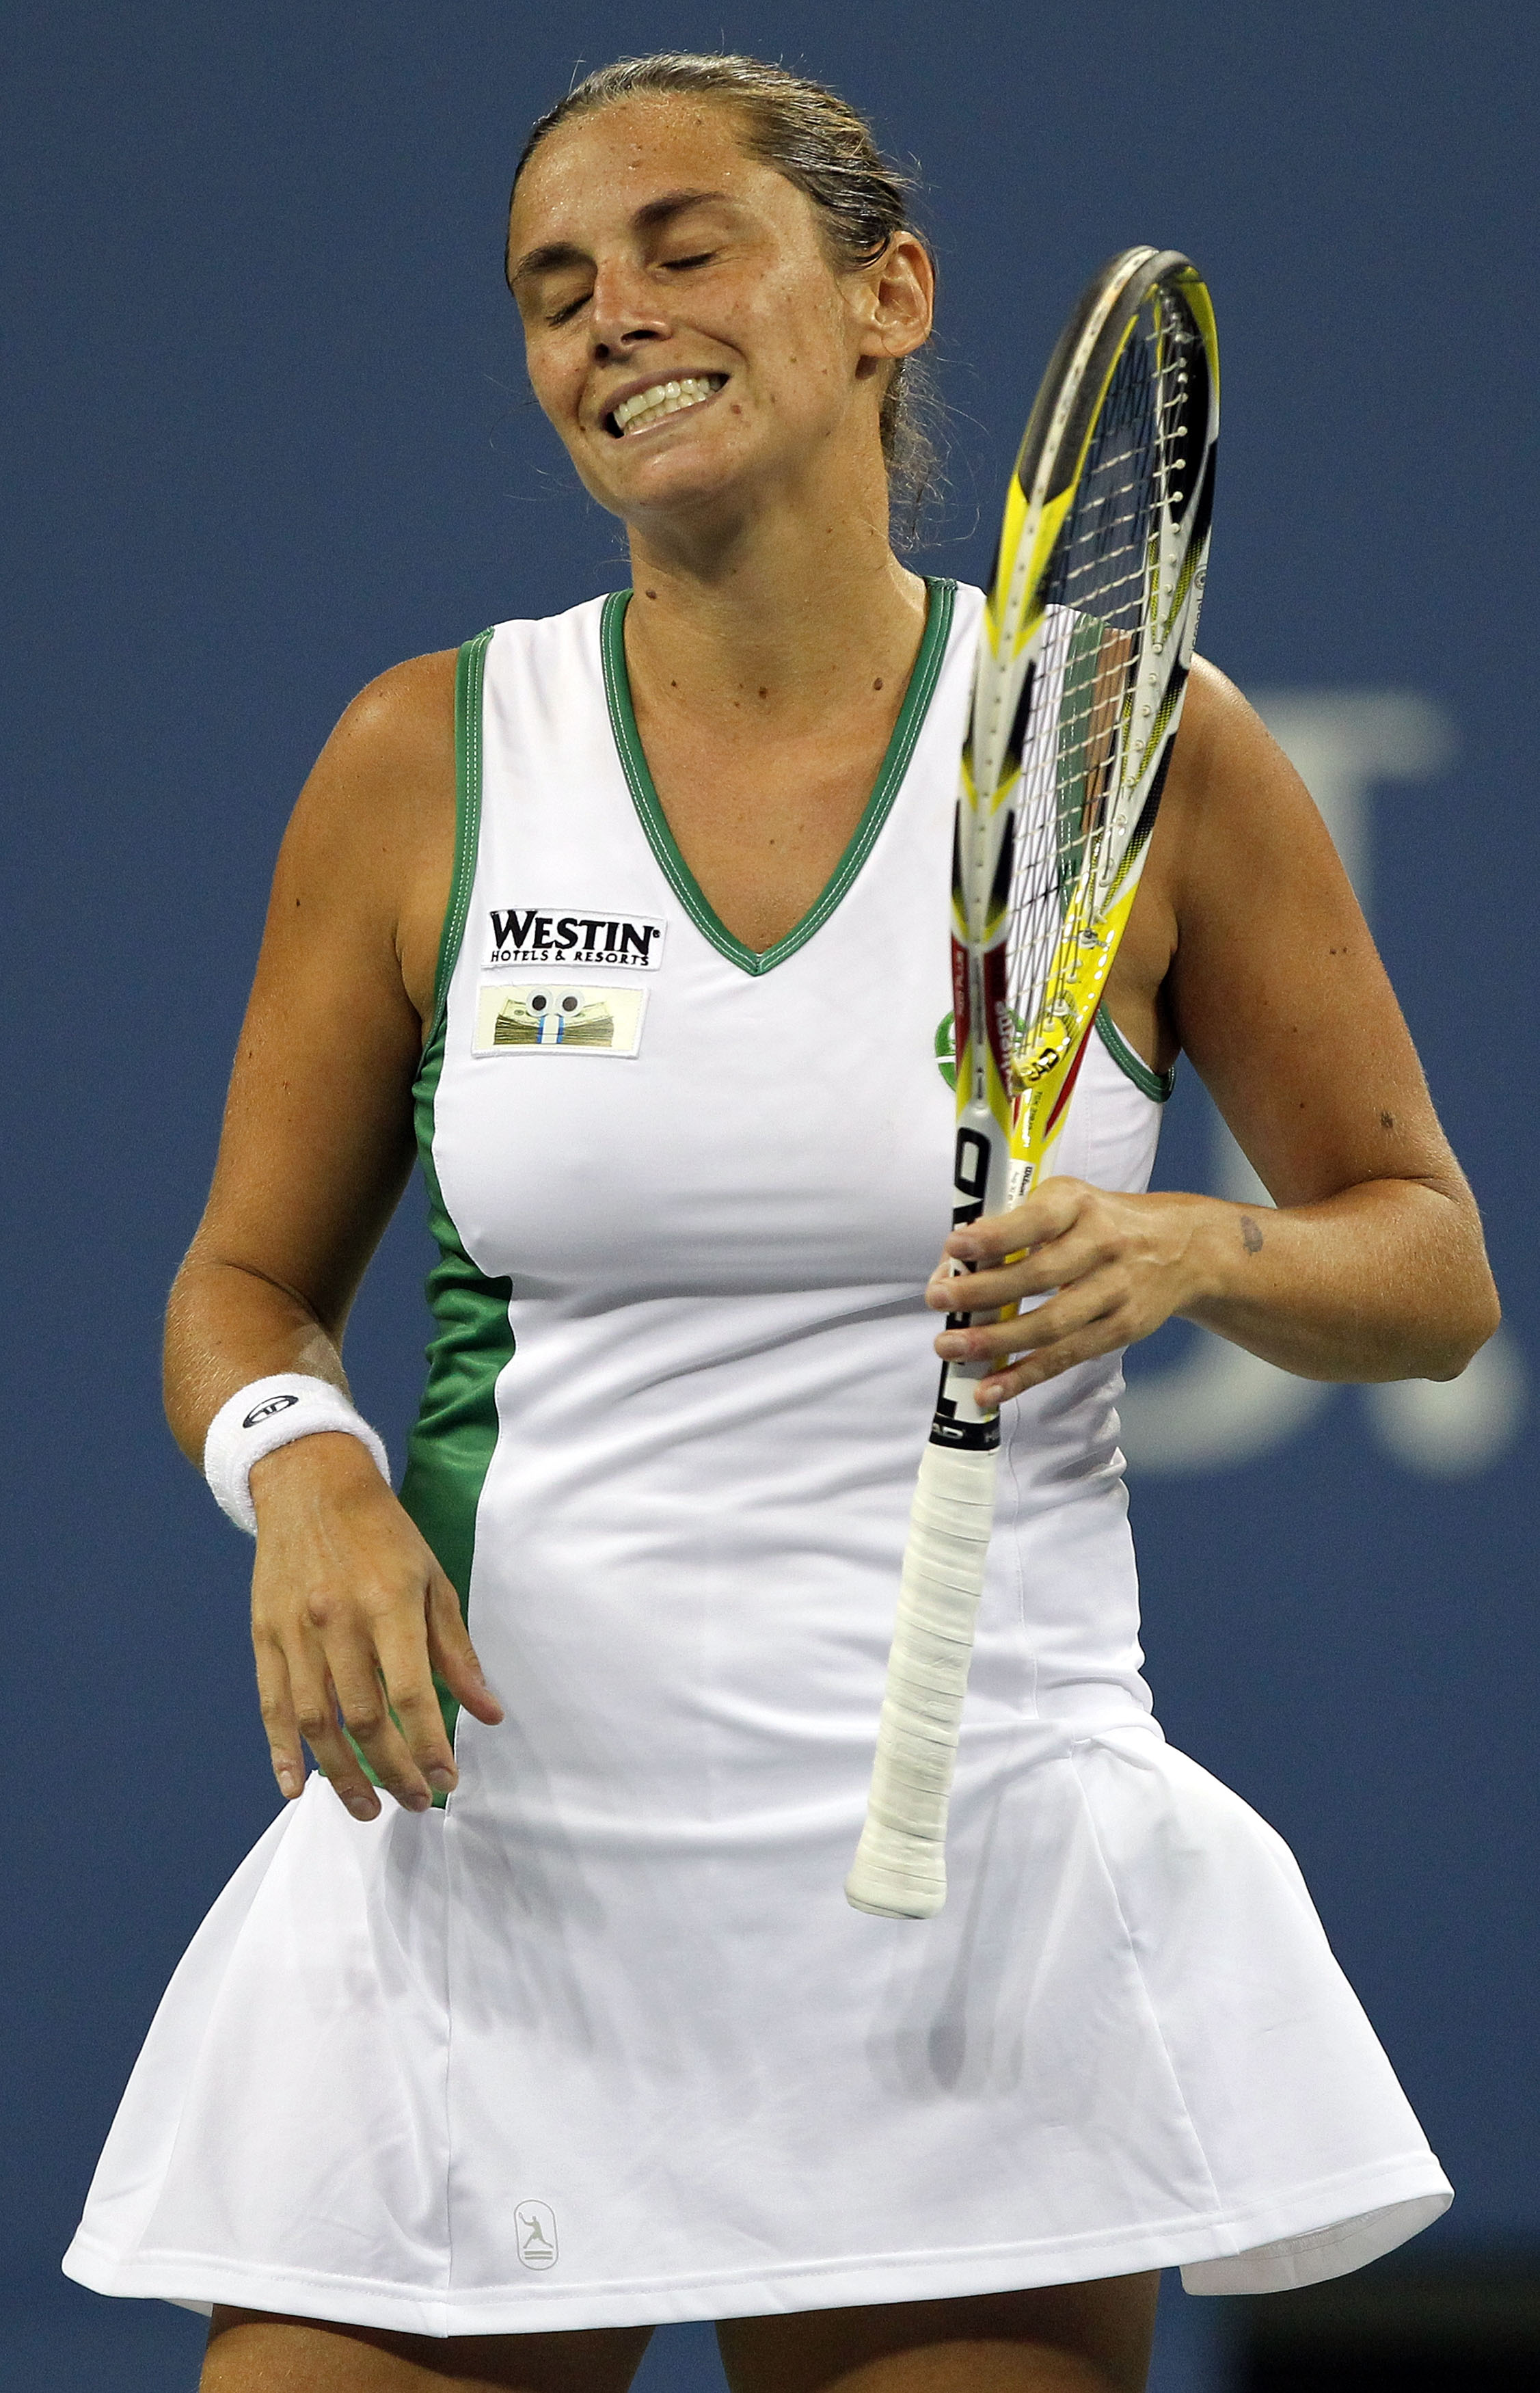 NEW YORK - AUGUST 30:  Roberta Vinci of Italy reacts after a point played against Venus Williams of the United States during the Women's Singles first round match on day one of the 2010 U.S. Open at the USTA Billie Jean King National Tennis Center on Augu